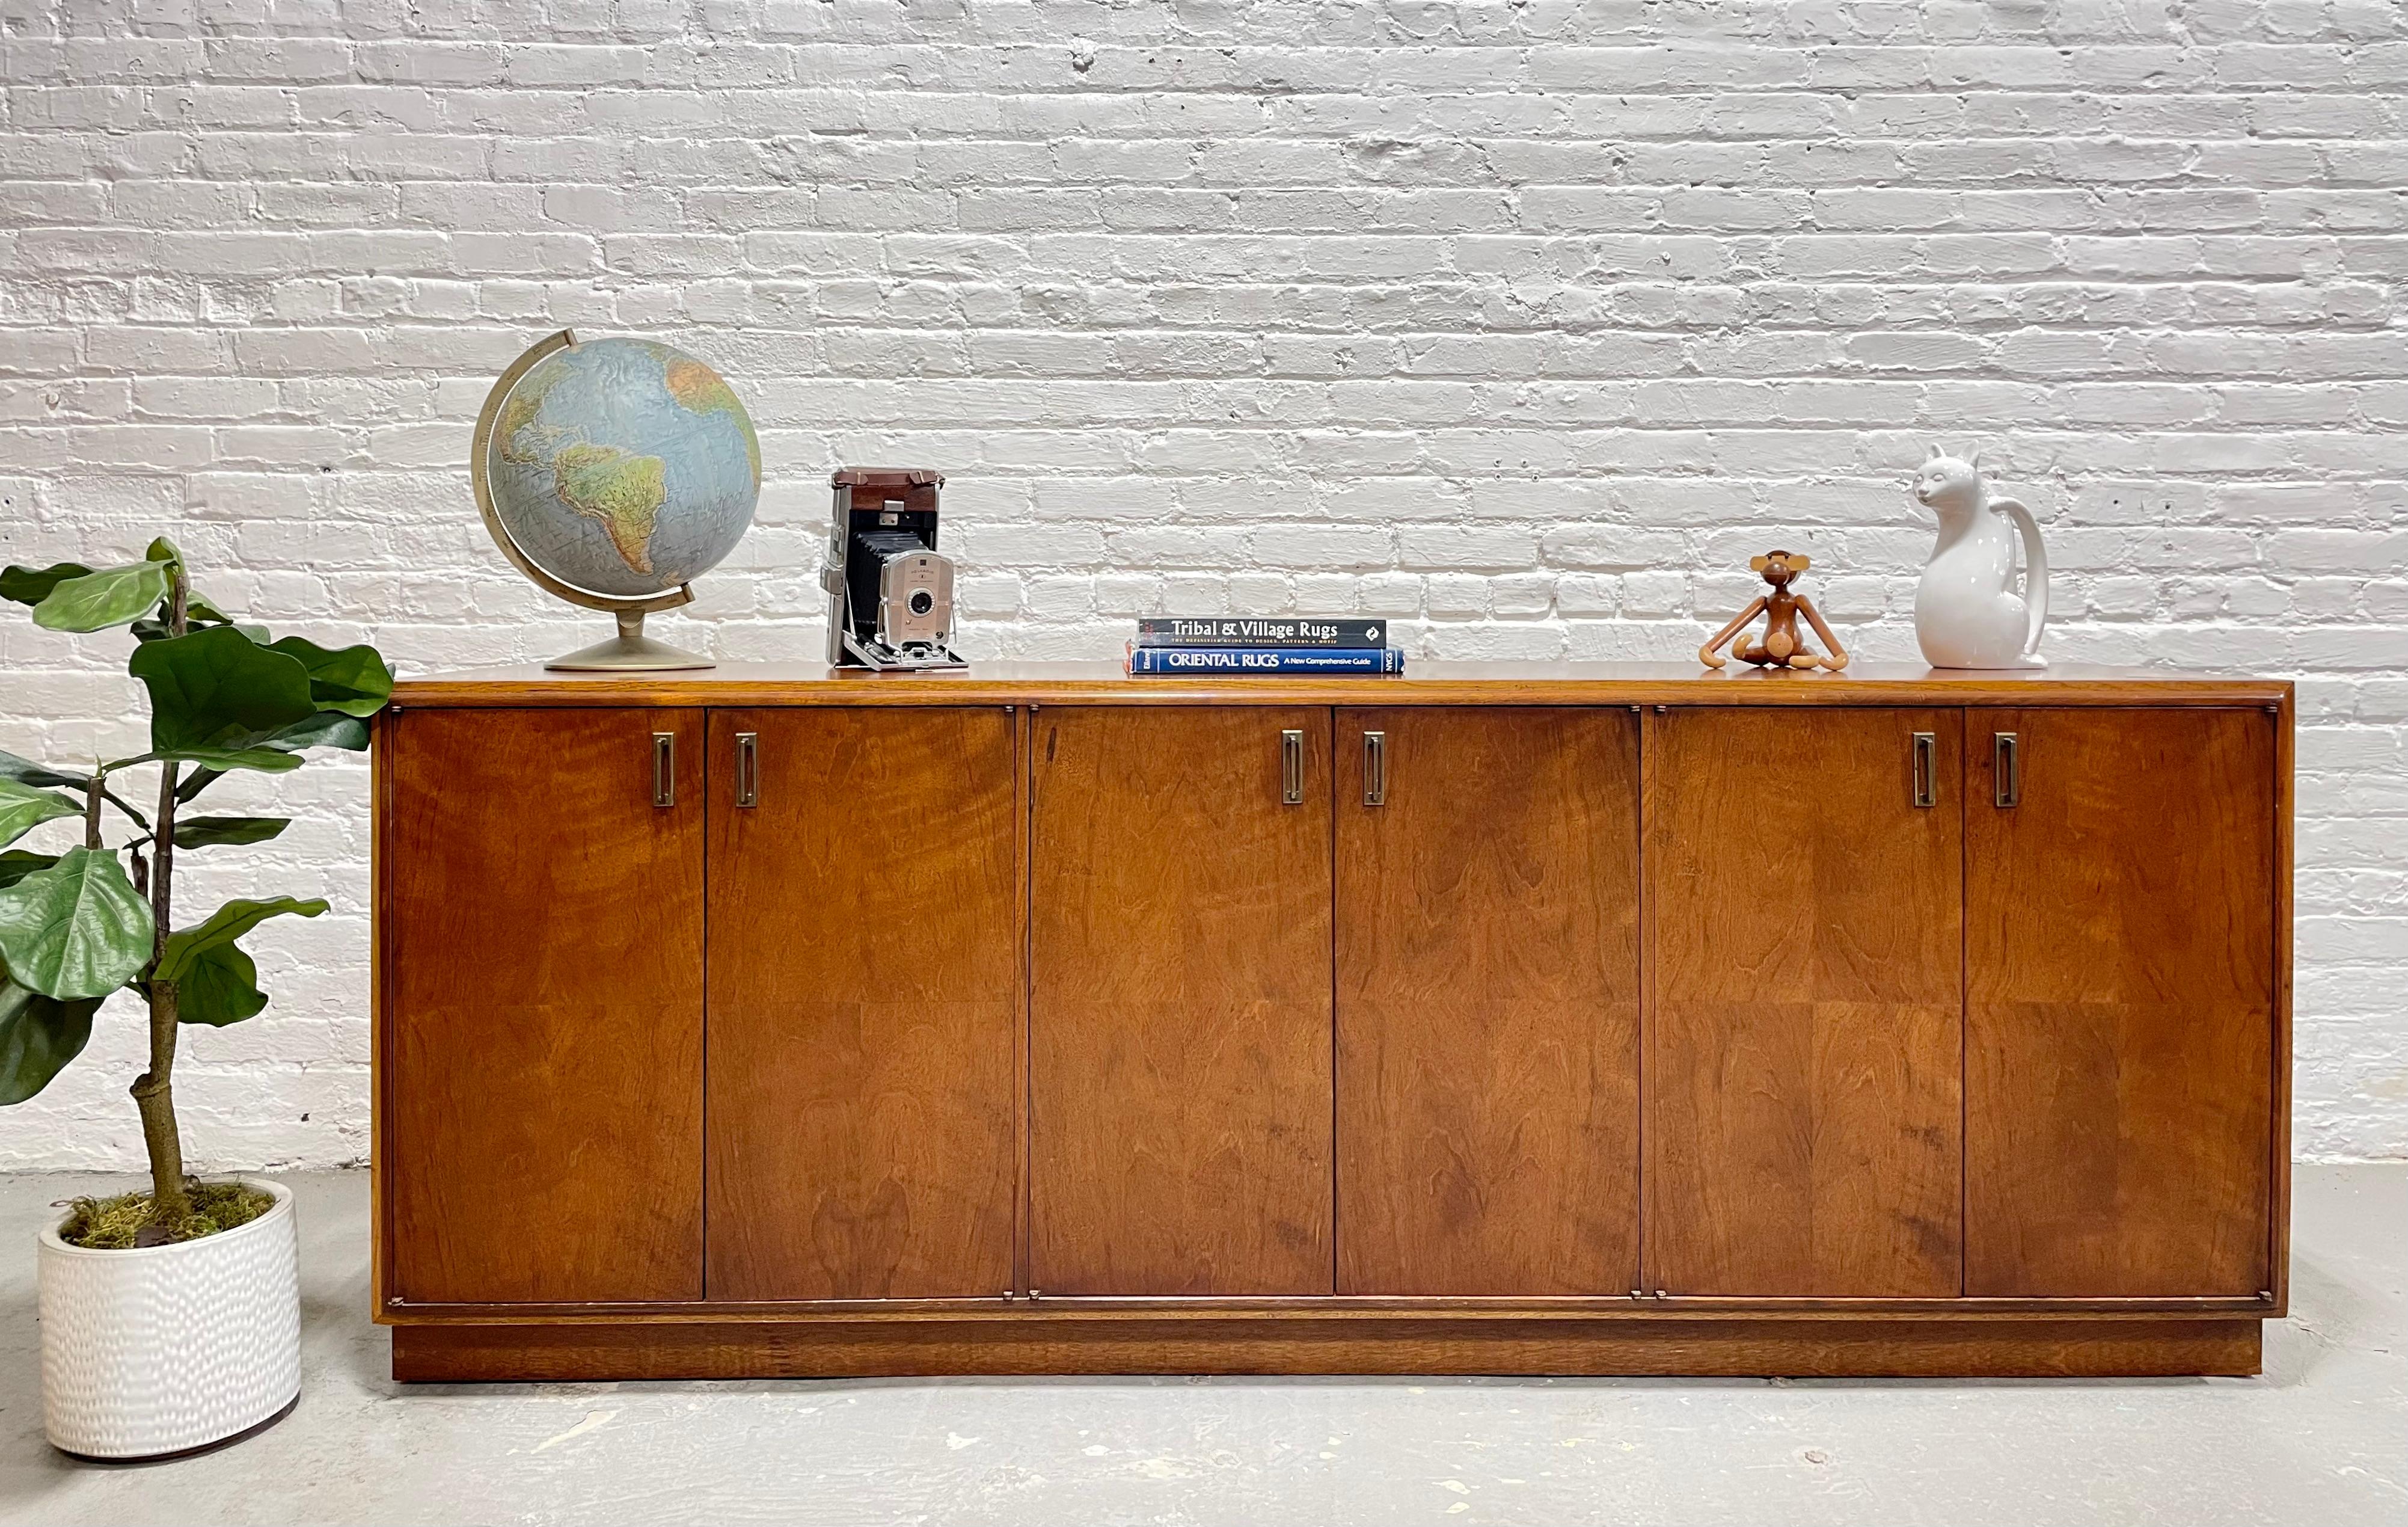 Long + Magnificent Mid Century Modern Walnut Credenza / Media Stand by Founders featuring the most incredible parquet wood pattern design.  The incredible wood grains repeat along the sides and top of this piece and it will easily brighten any room.